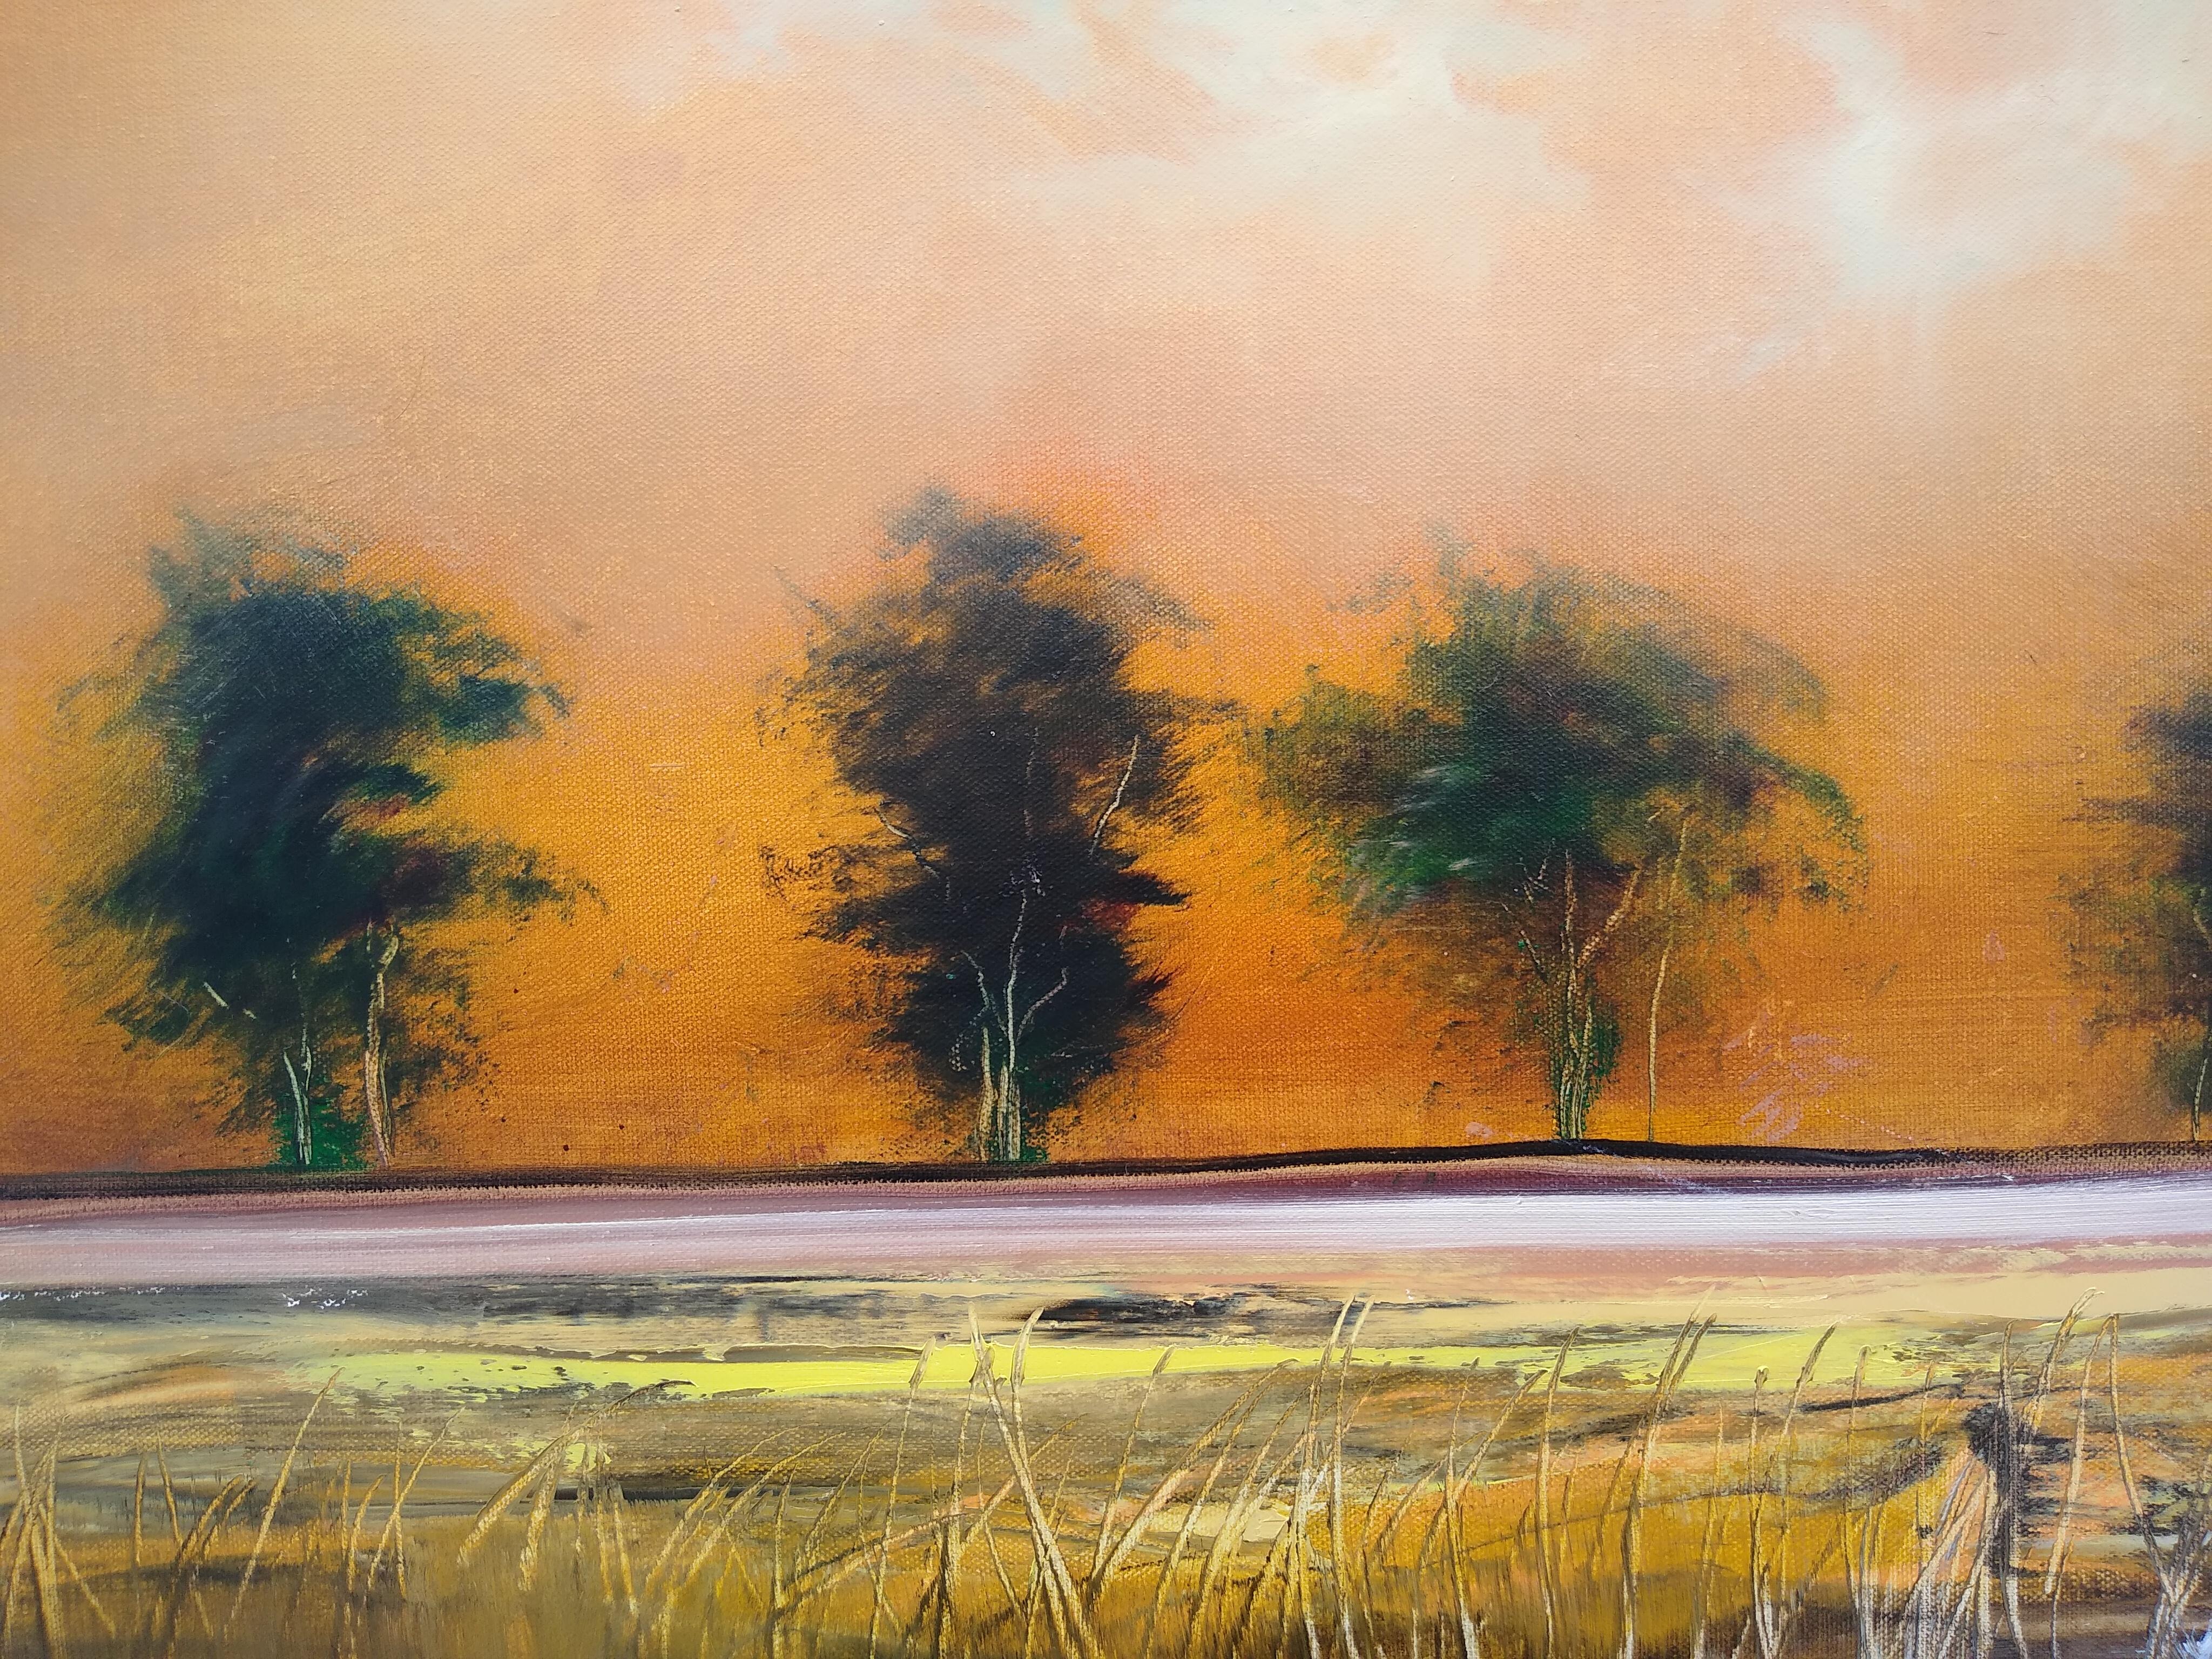 <p>Artist Comments<br>Artist George Peebles draws on his surroundings in Michigan but ultimately paints entirely from his imagination. In this piece, he captures the warm and vibrant hues of the sky at dusk. Trees line the horizon far away in the